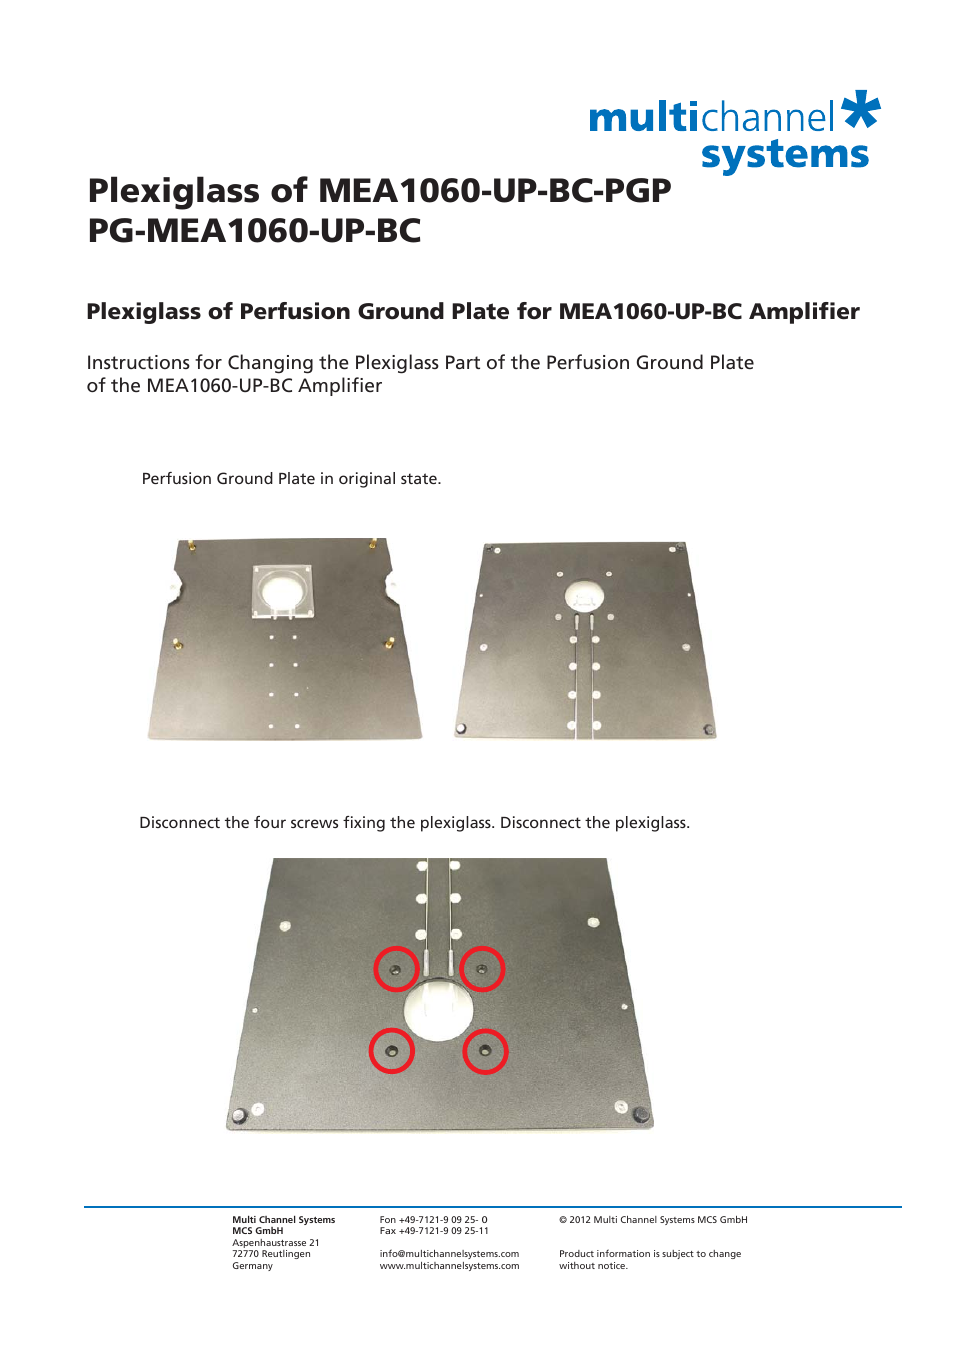 PG-MEA1060-UP-BC-PGP